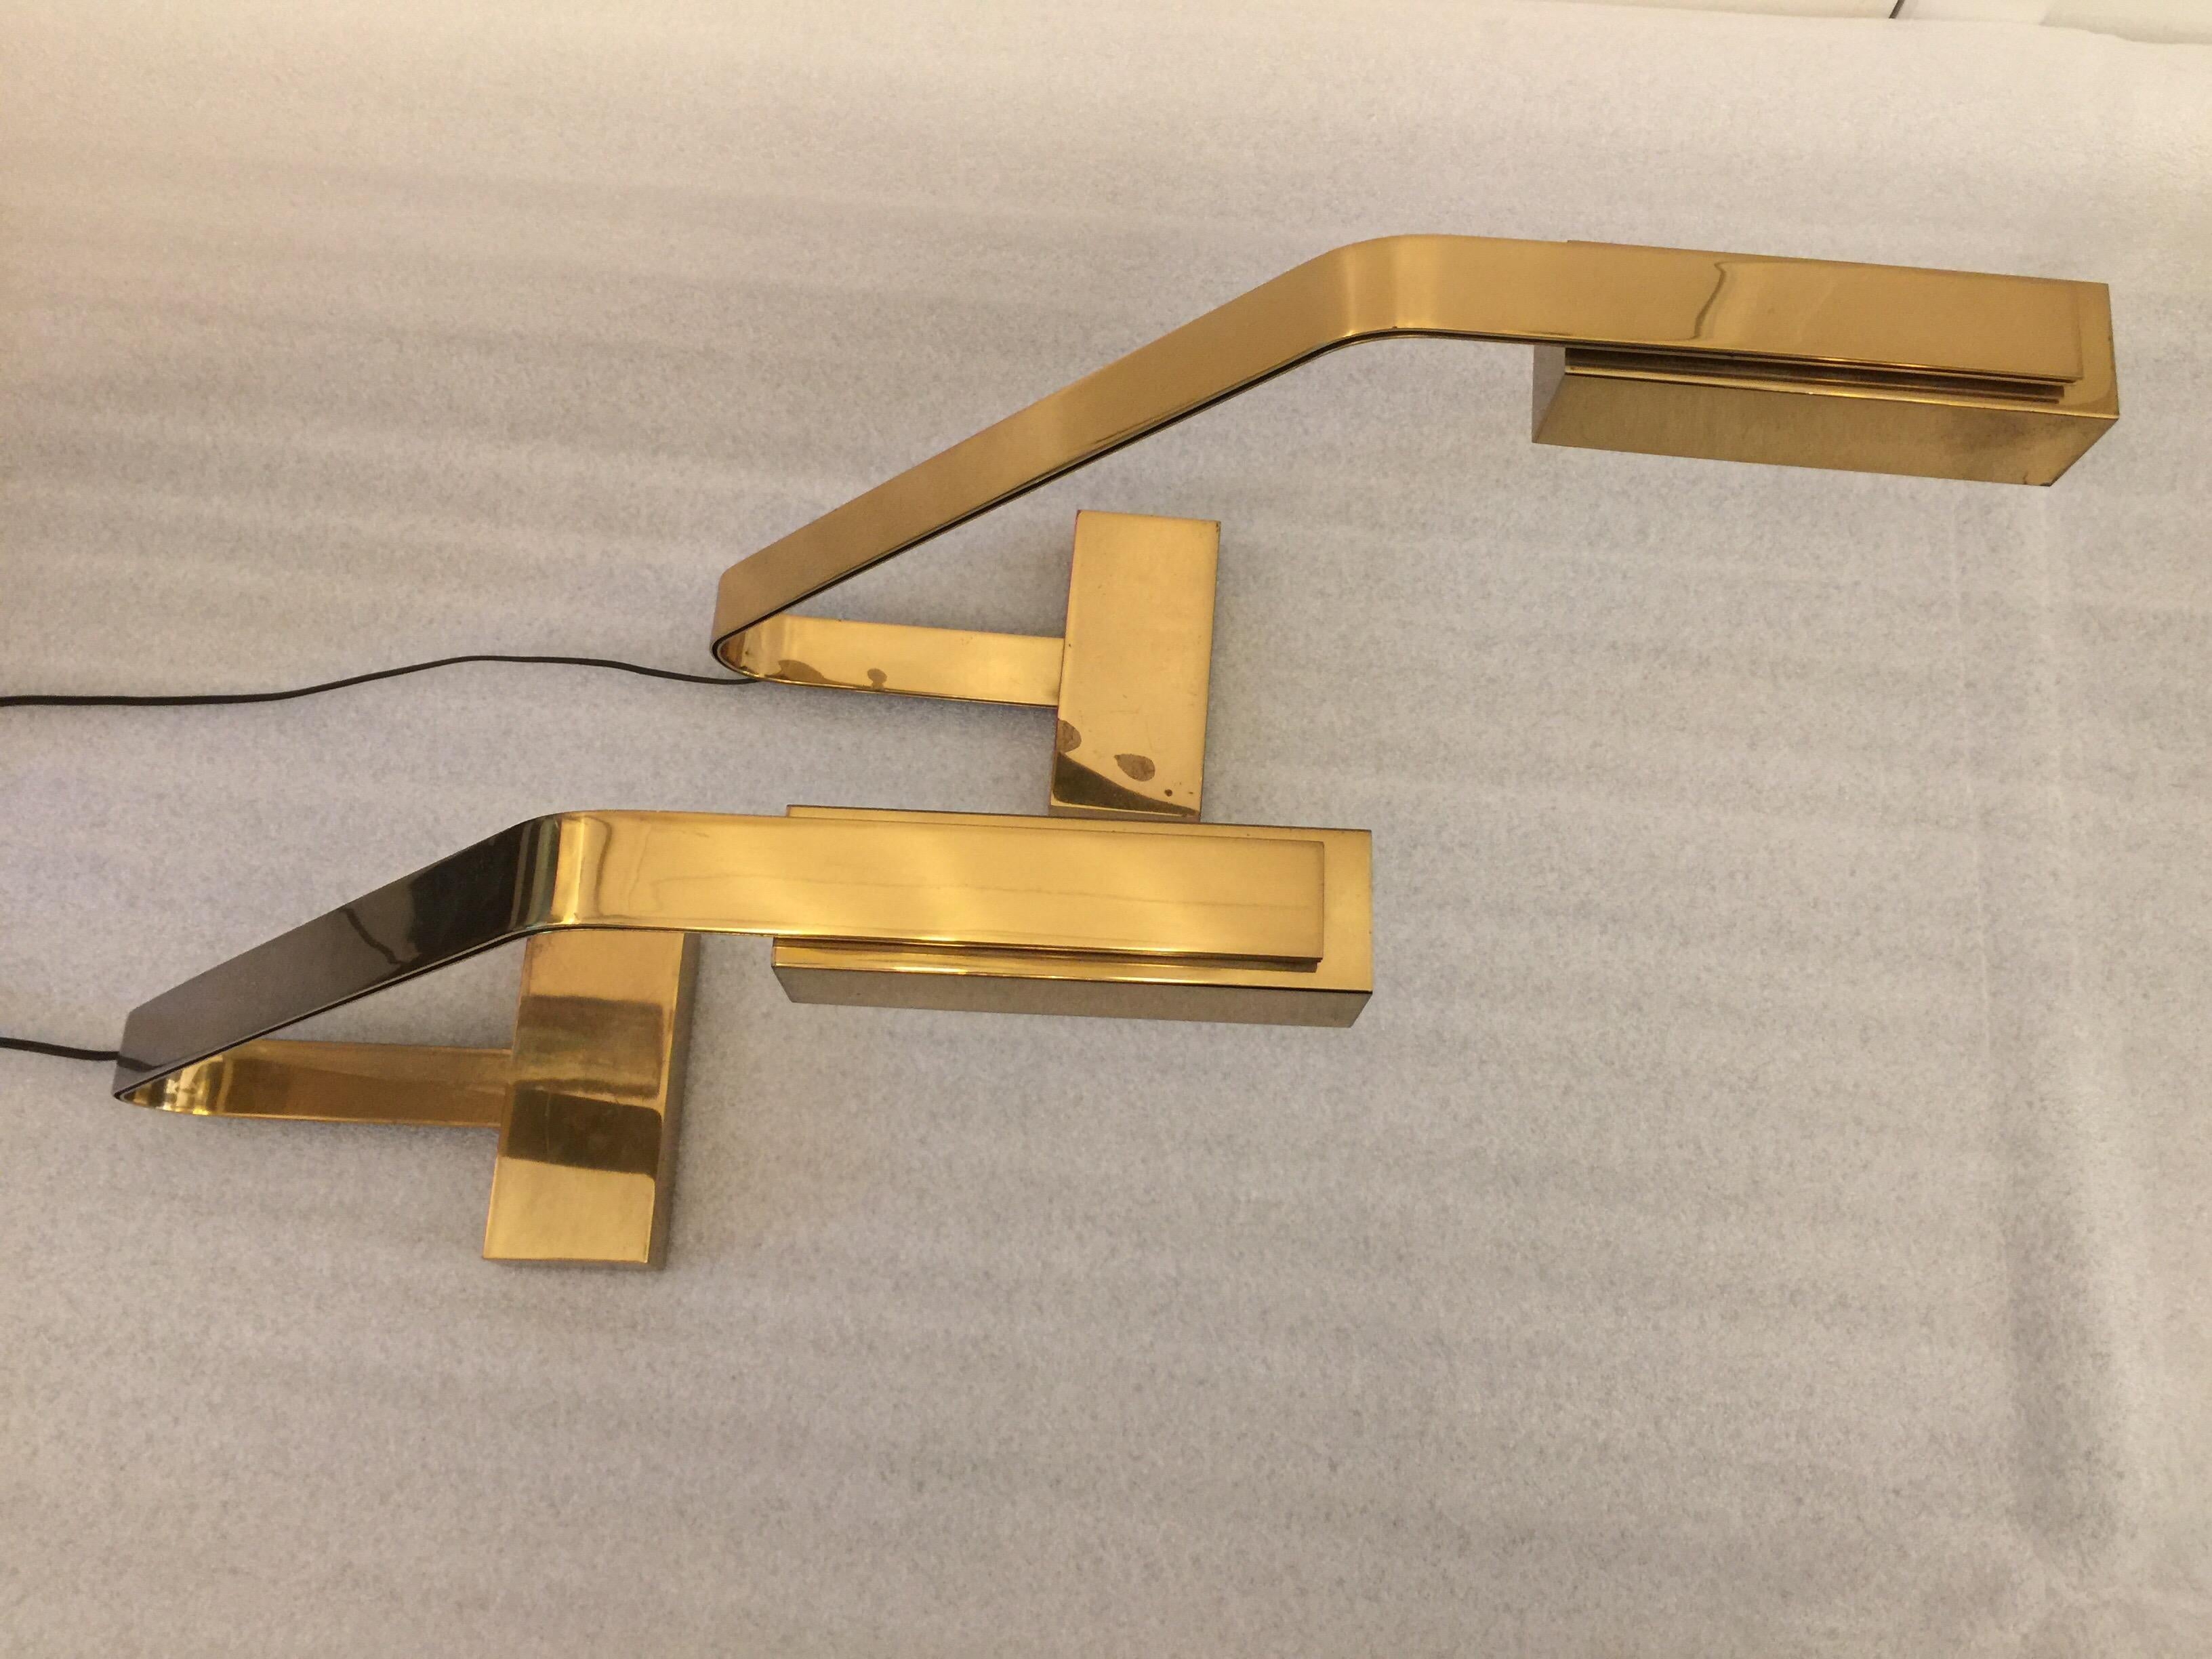 Late 20th Century Rare Casella Brass Flat Bar Desk Lamps, Pair For Sale